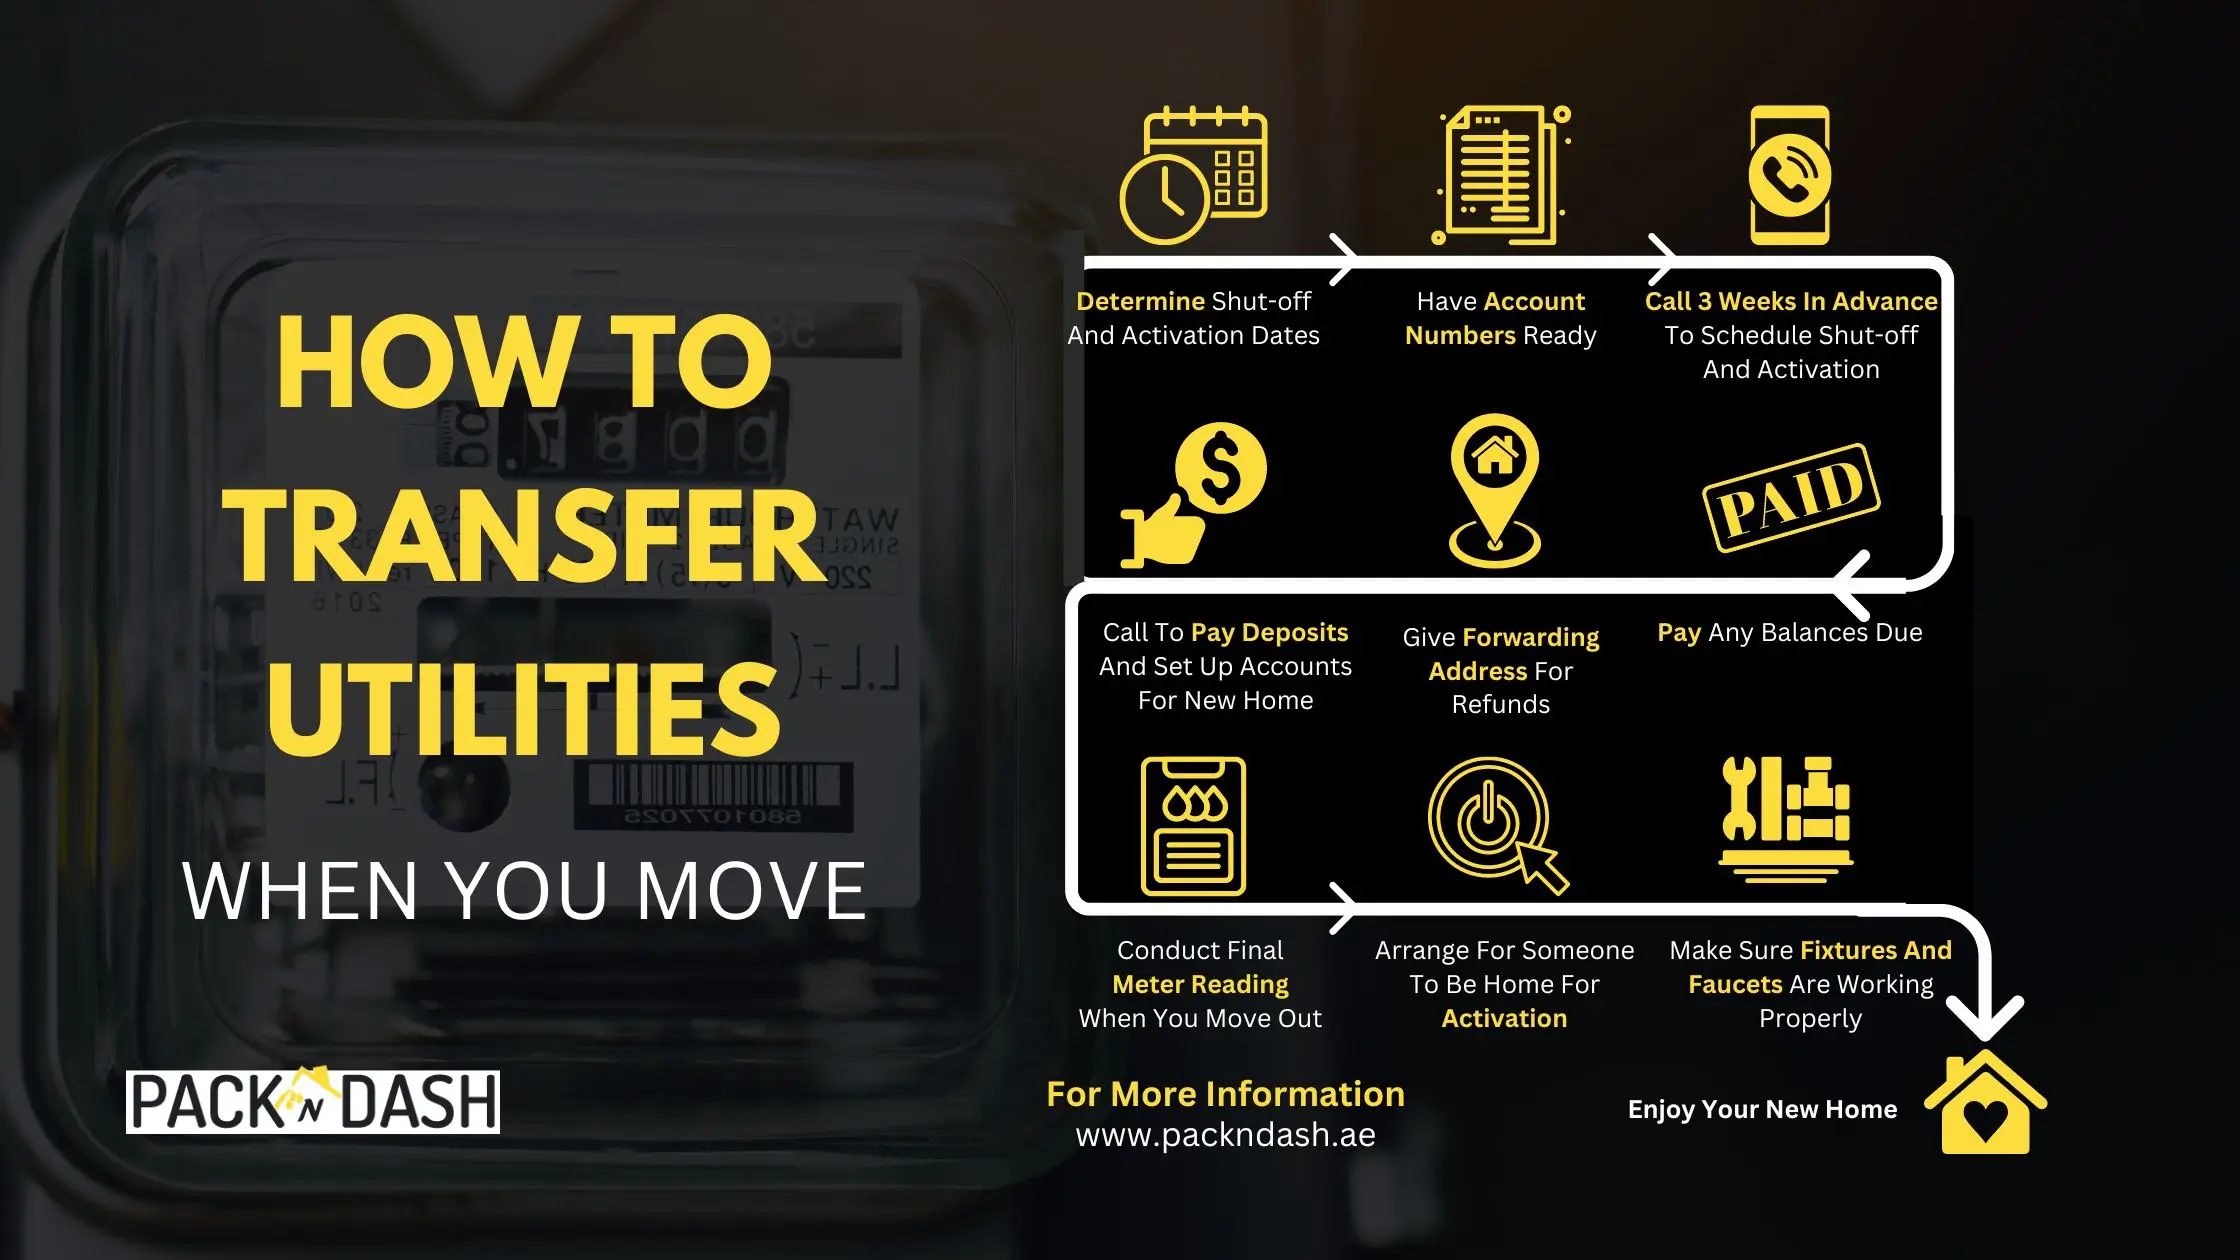 A Guide to Transferring Utilities When You Move